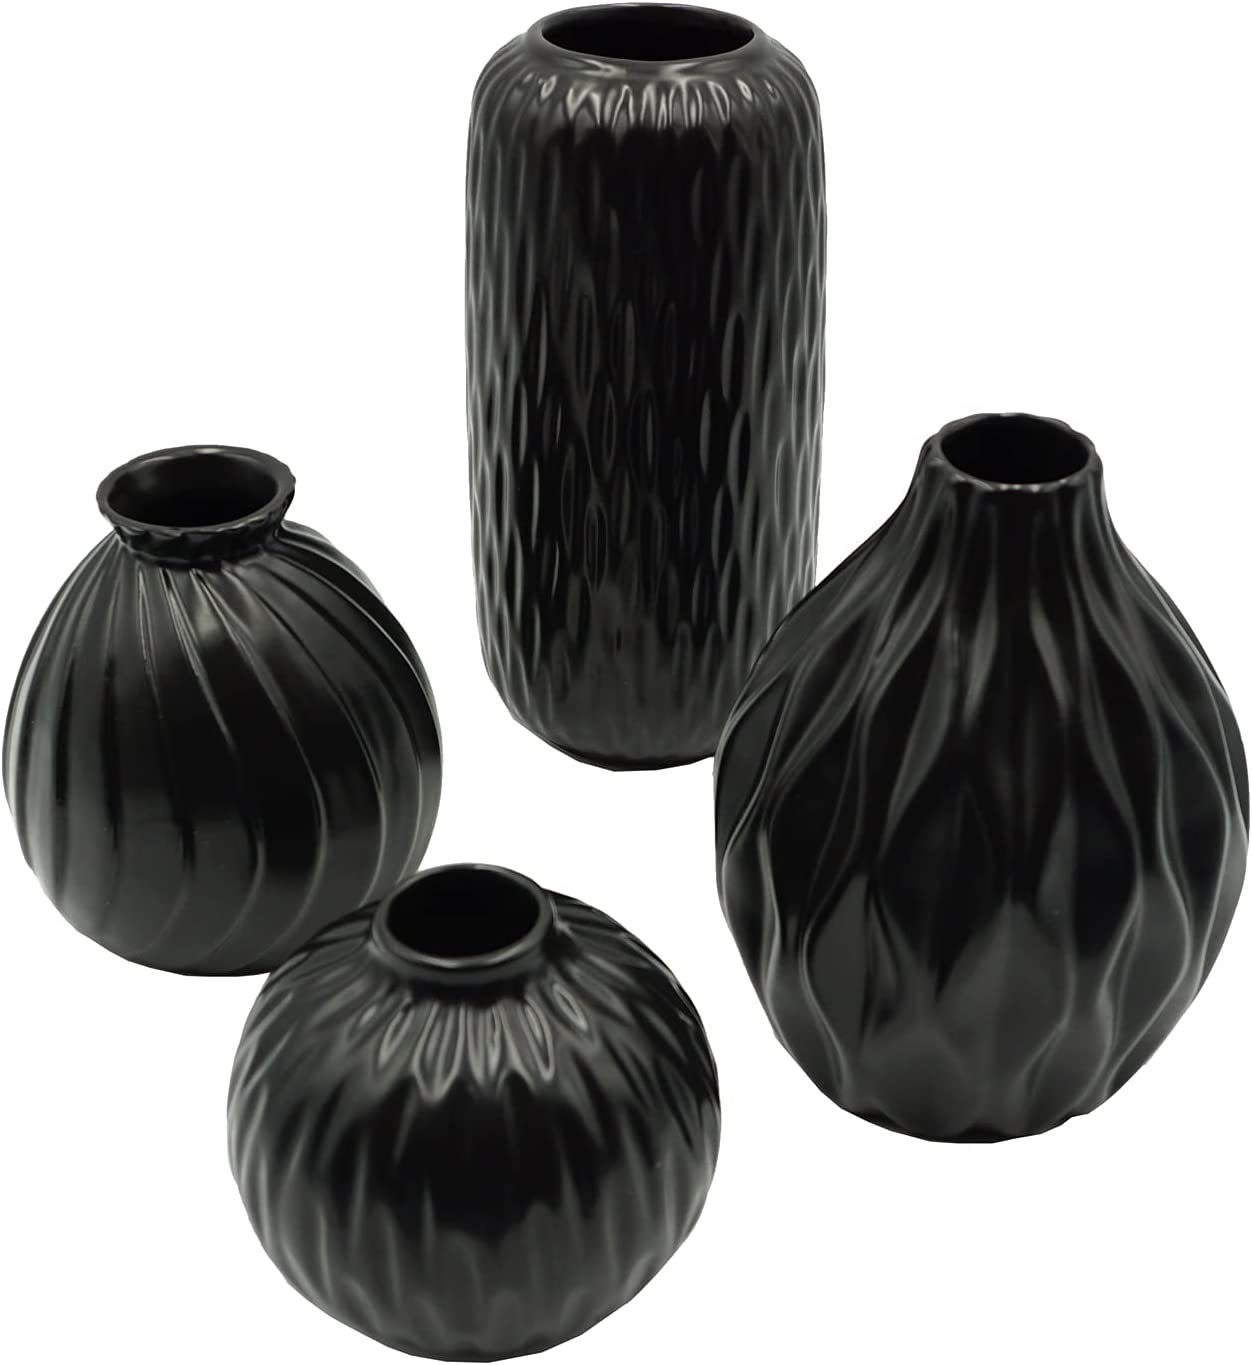 New Contemporary Designer Black Abstract Sculptured Luxury Porcelain Vase Set of 4 - Home Decor Gifts and More